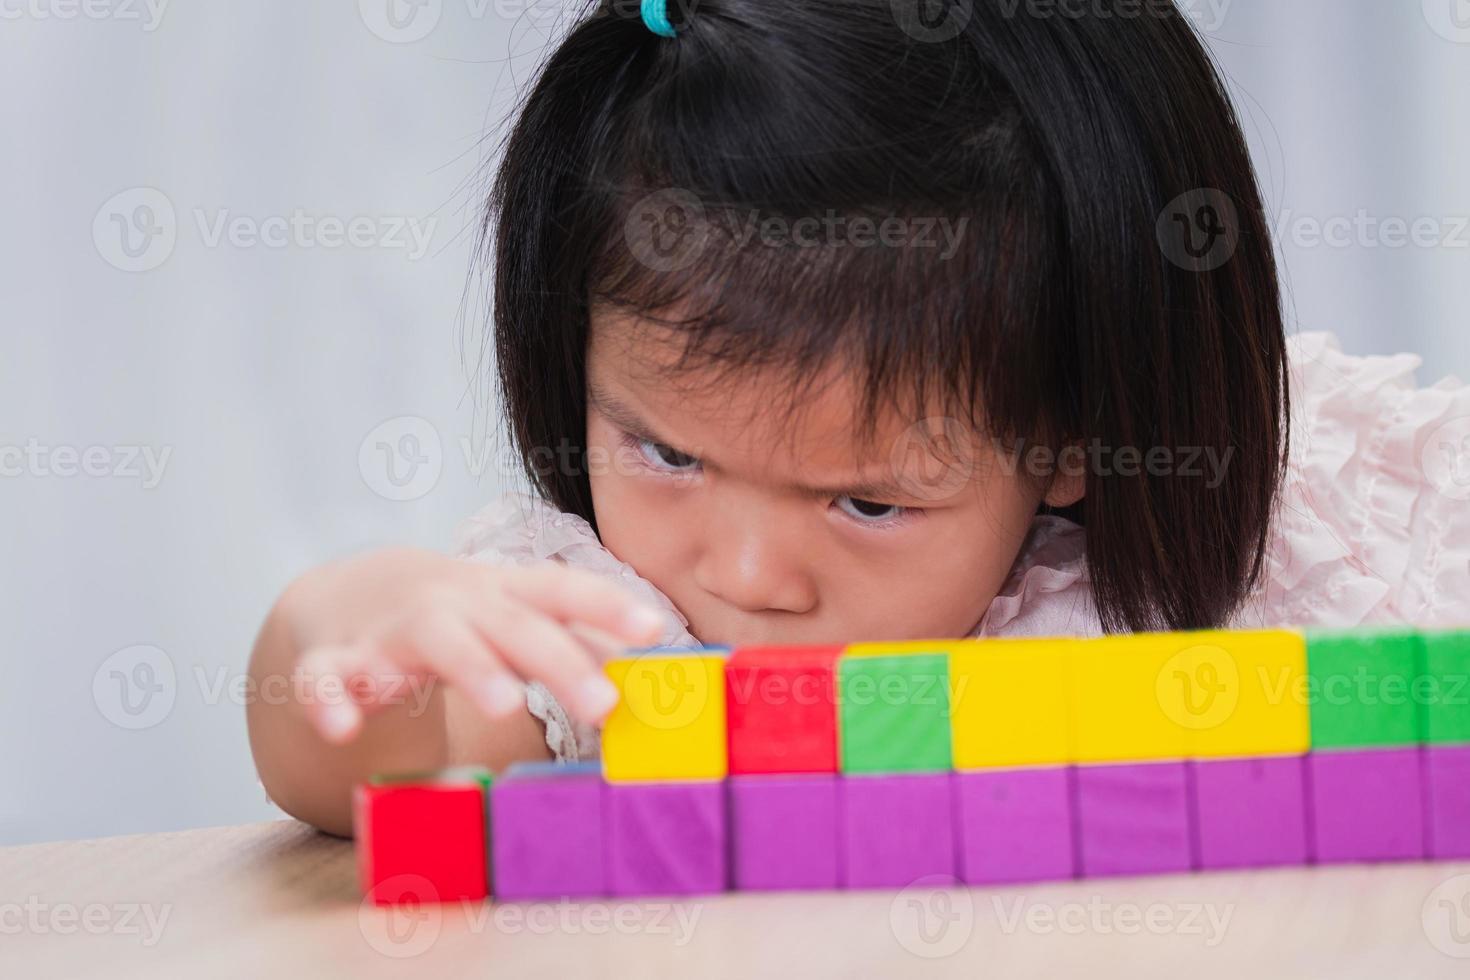 Child little girl playing wooden toys at home or kindergarten school. Kid is seriously sorting and building the wooden blocks, she aims the toy blocks to match. Perfectionist children concept. photo